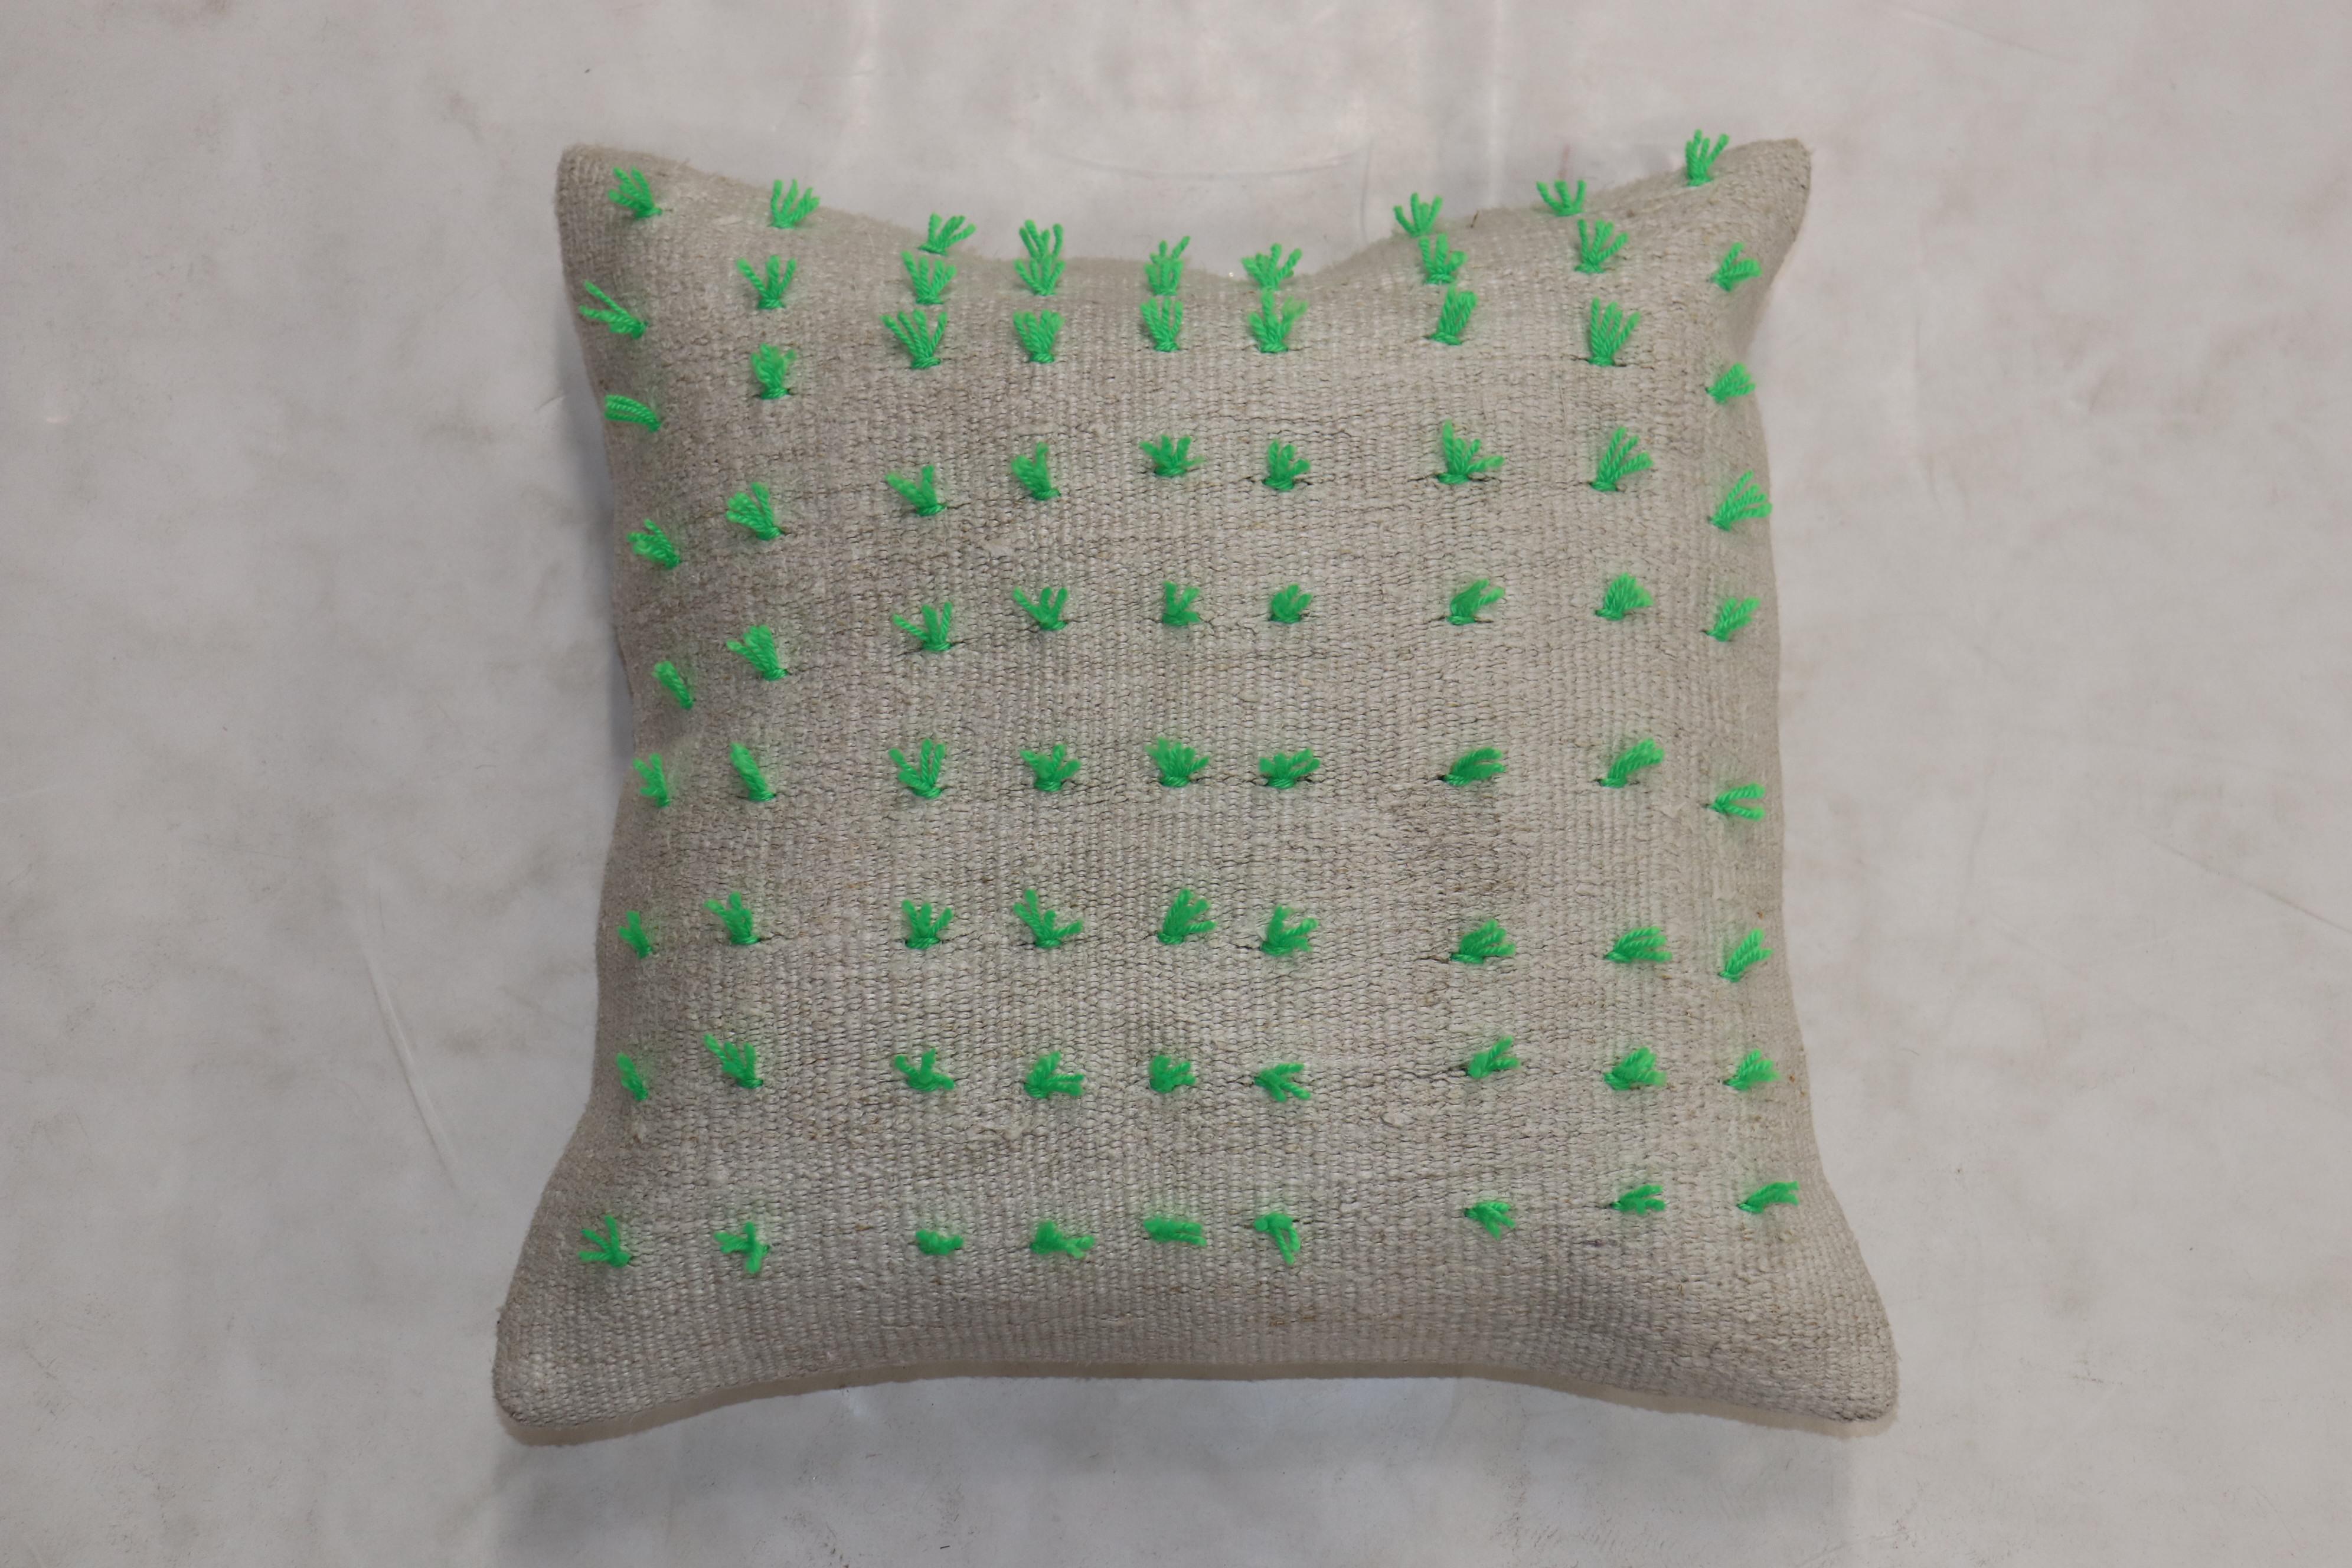 Pillow made from a vintage Turkish Kilim with green wool stitched on giving it a bohemian vibe. Zipper closure and foam insert provided.


Measures: 20